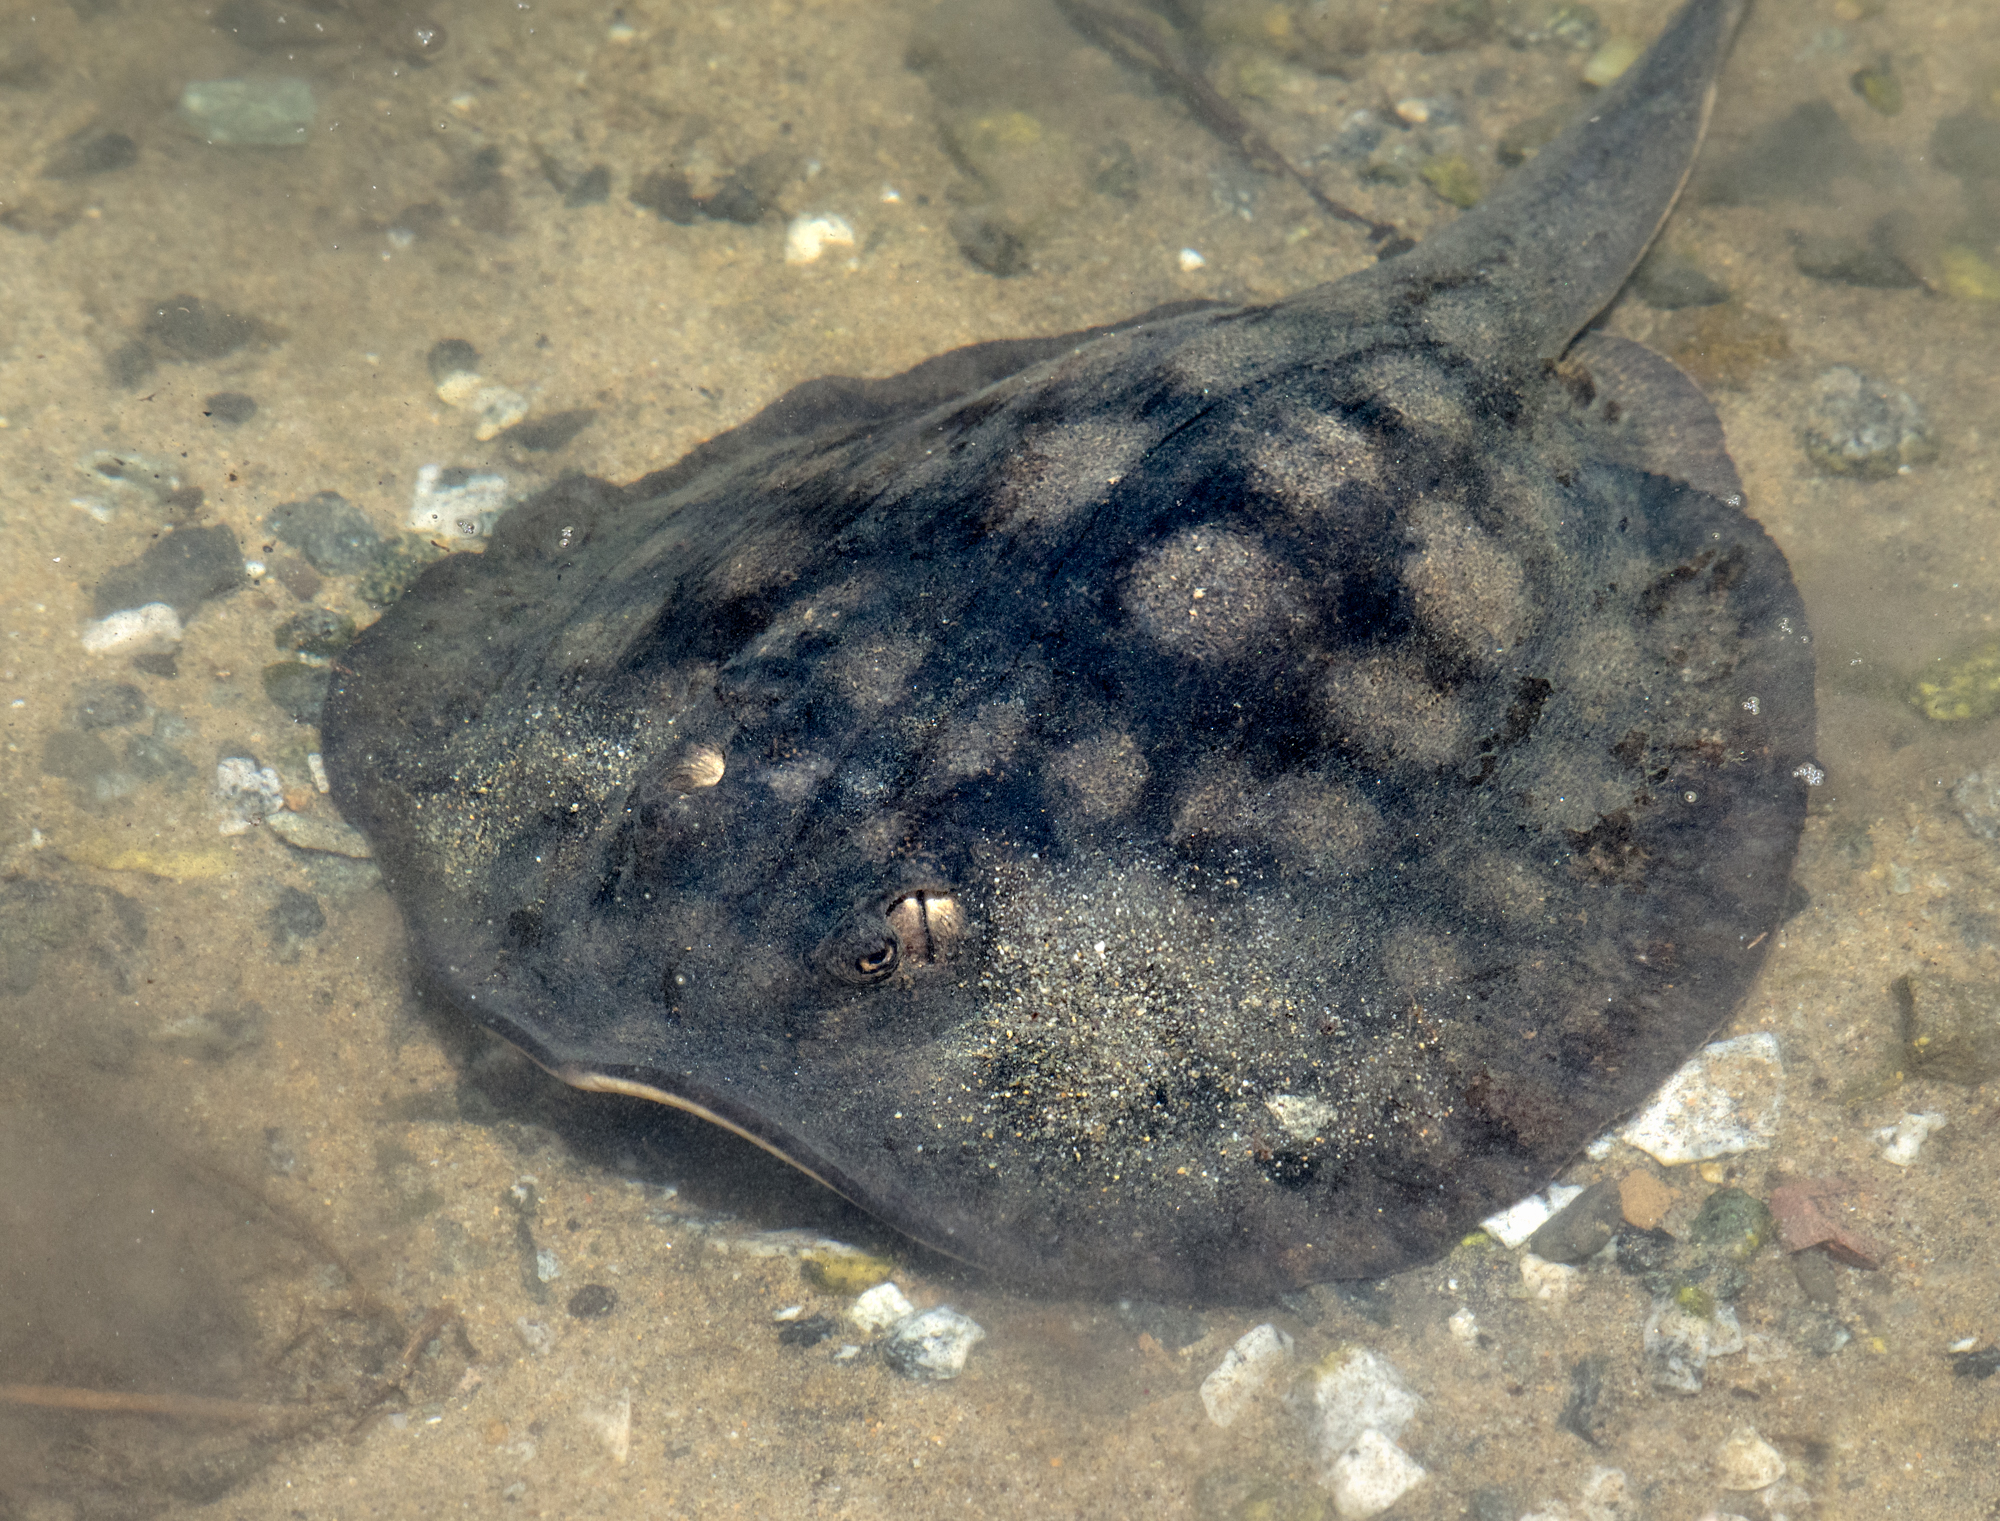 A round stingray (Urolophus halleri) I photographed in shallow water at Bolsa Chica wetlands (Southern California). The clouds of sand around the eyes and and body were formed as the stingray flapped and positioned deeper in the sand, expelling water. You can see the spiracles behind the eyes.